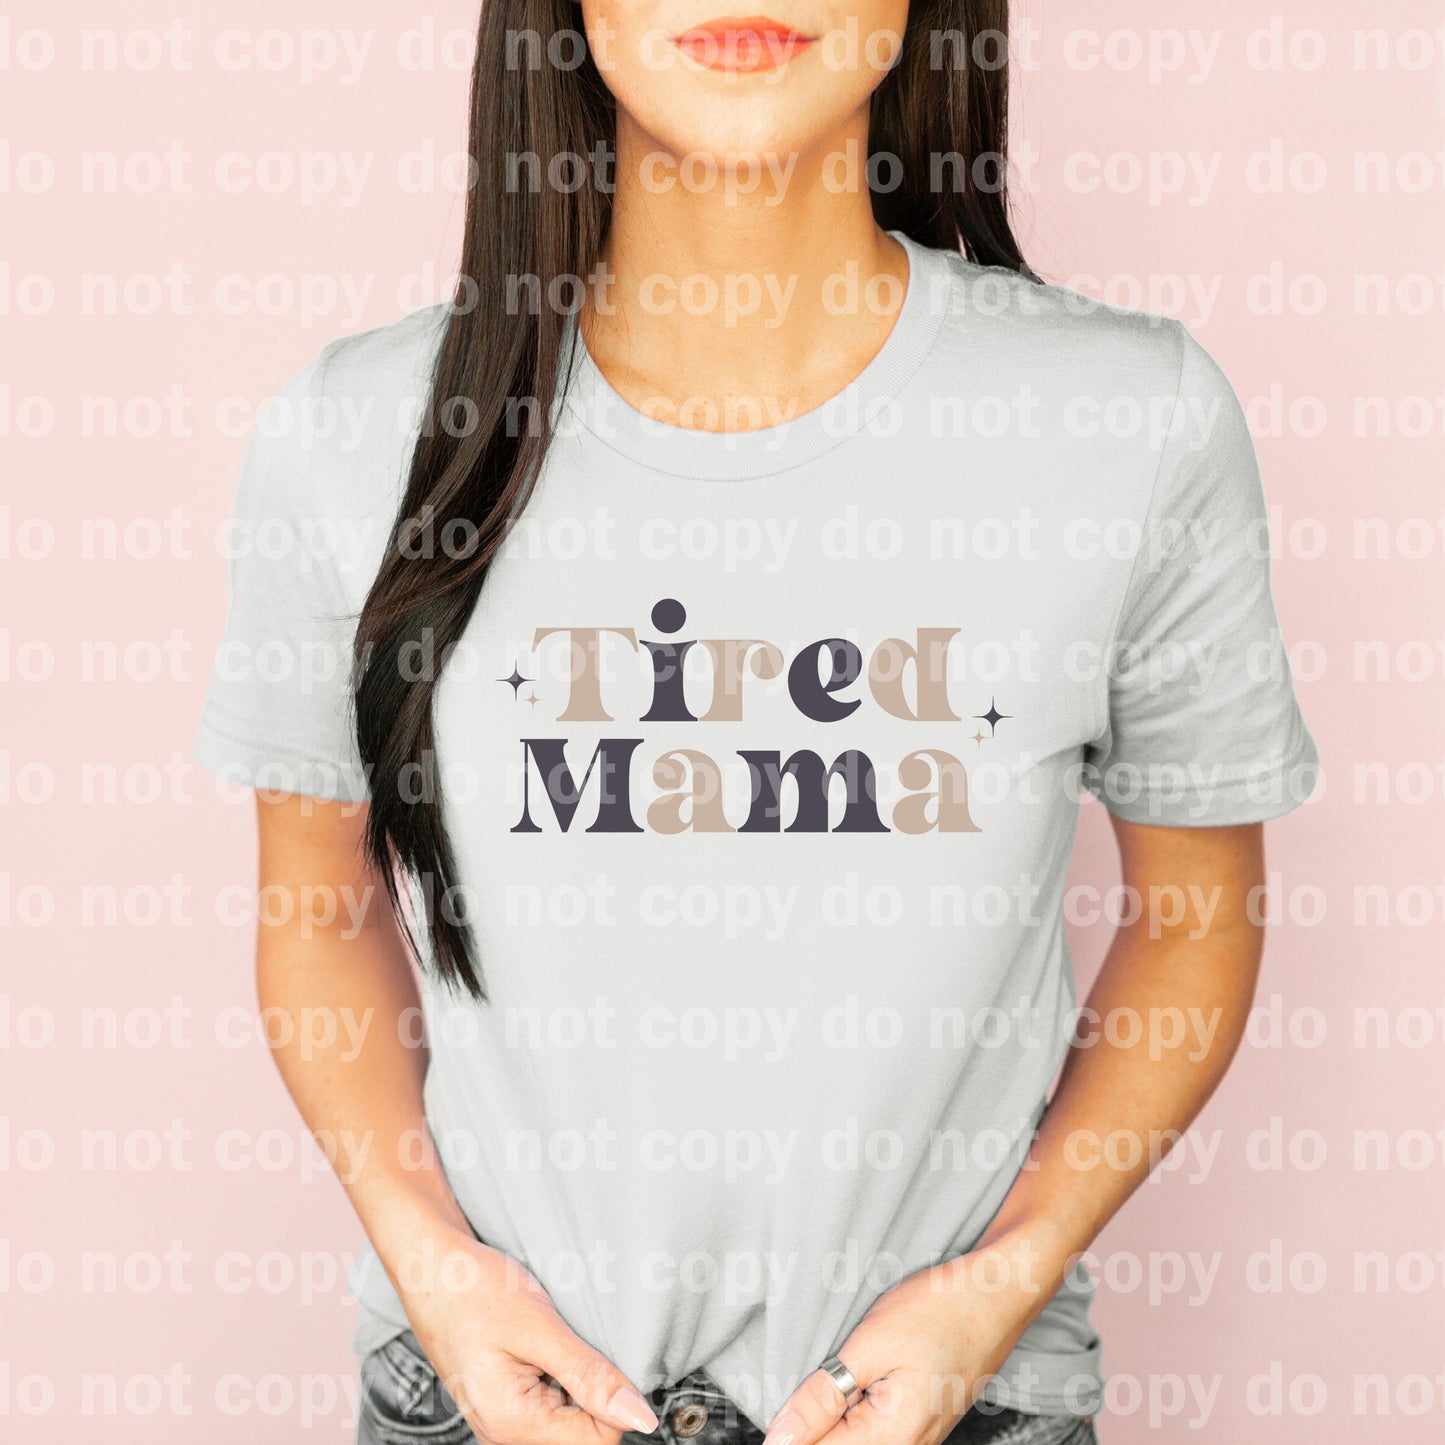 Tired Mama Dream Print or Sublimation Print